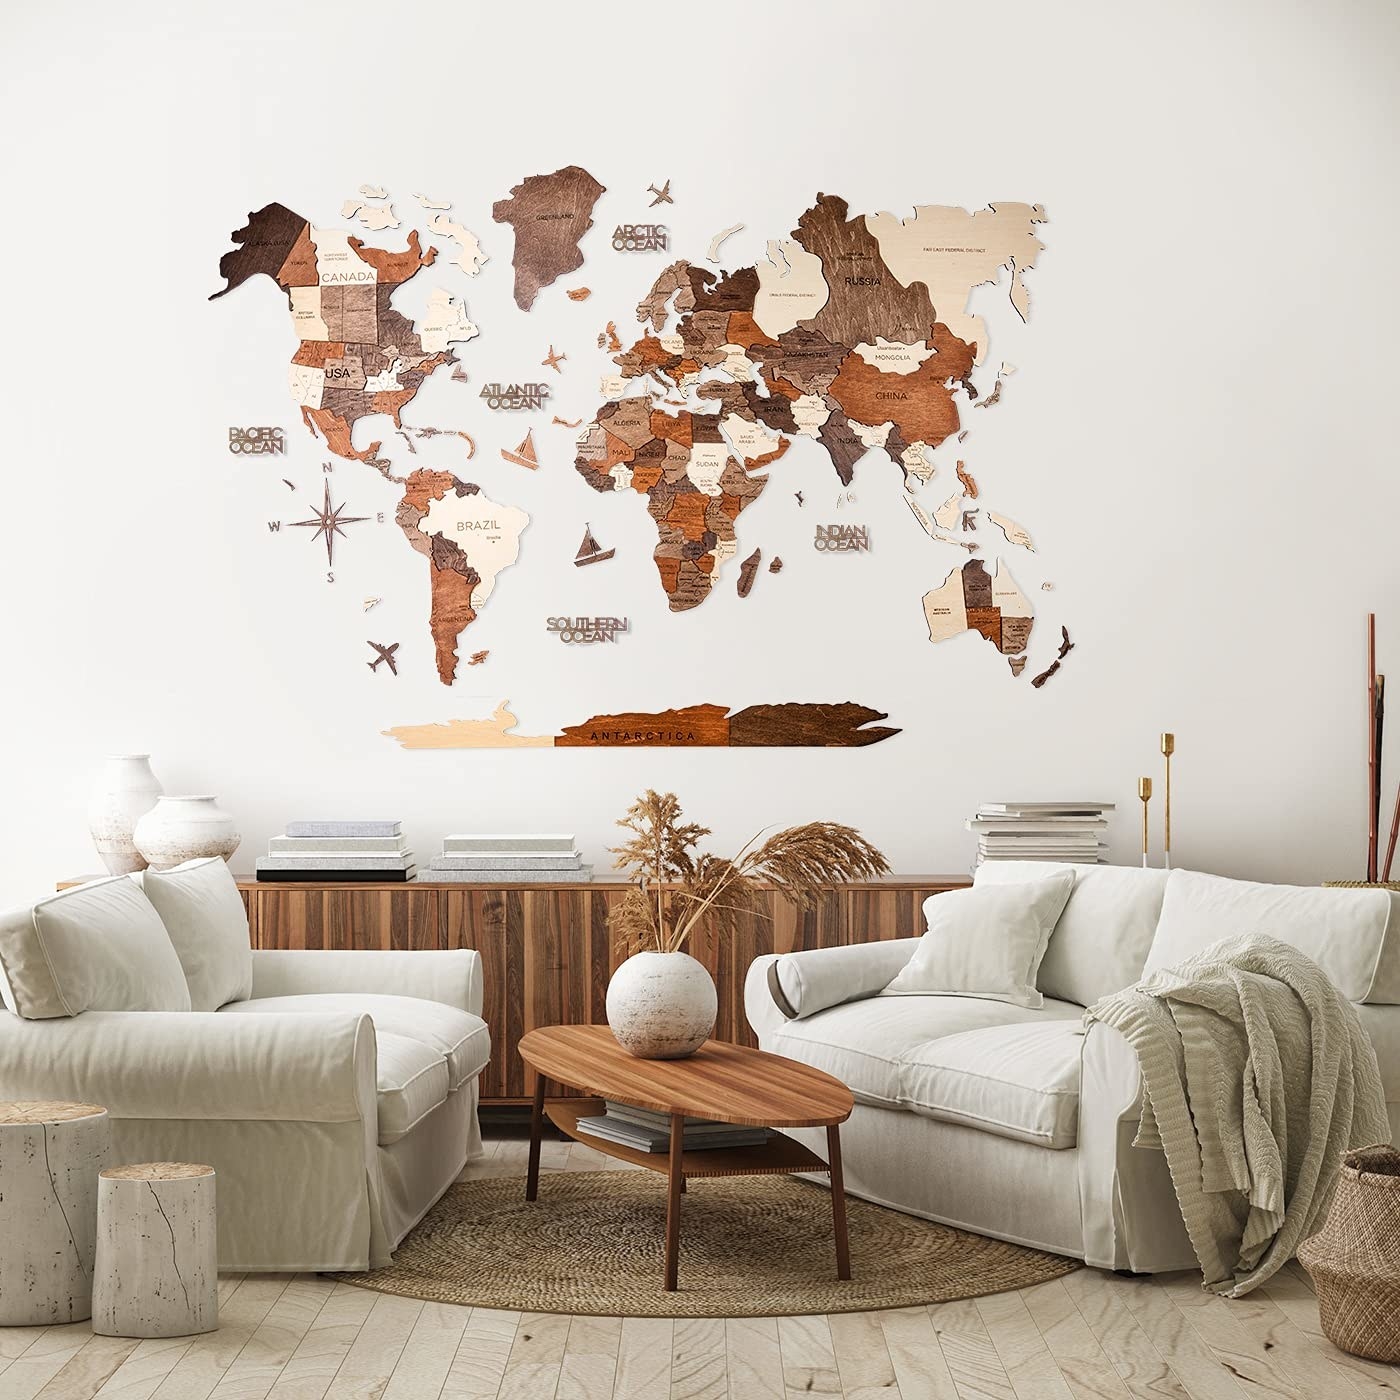 The 3D wooden map on a living room wall